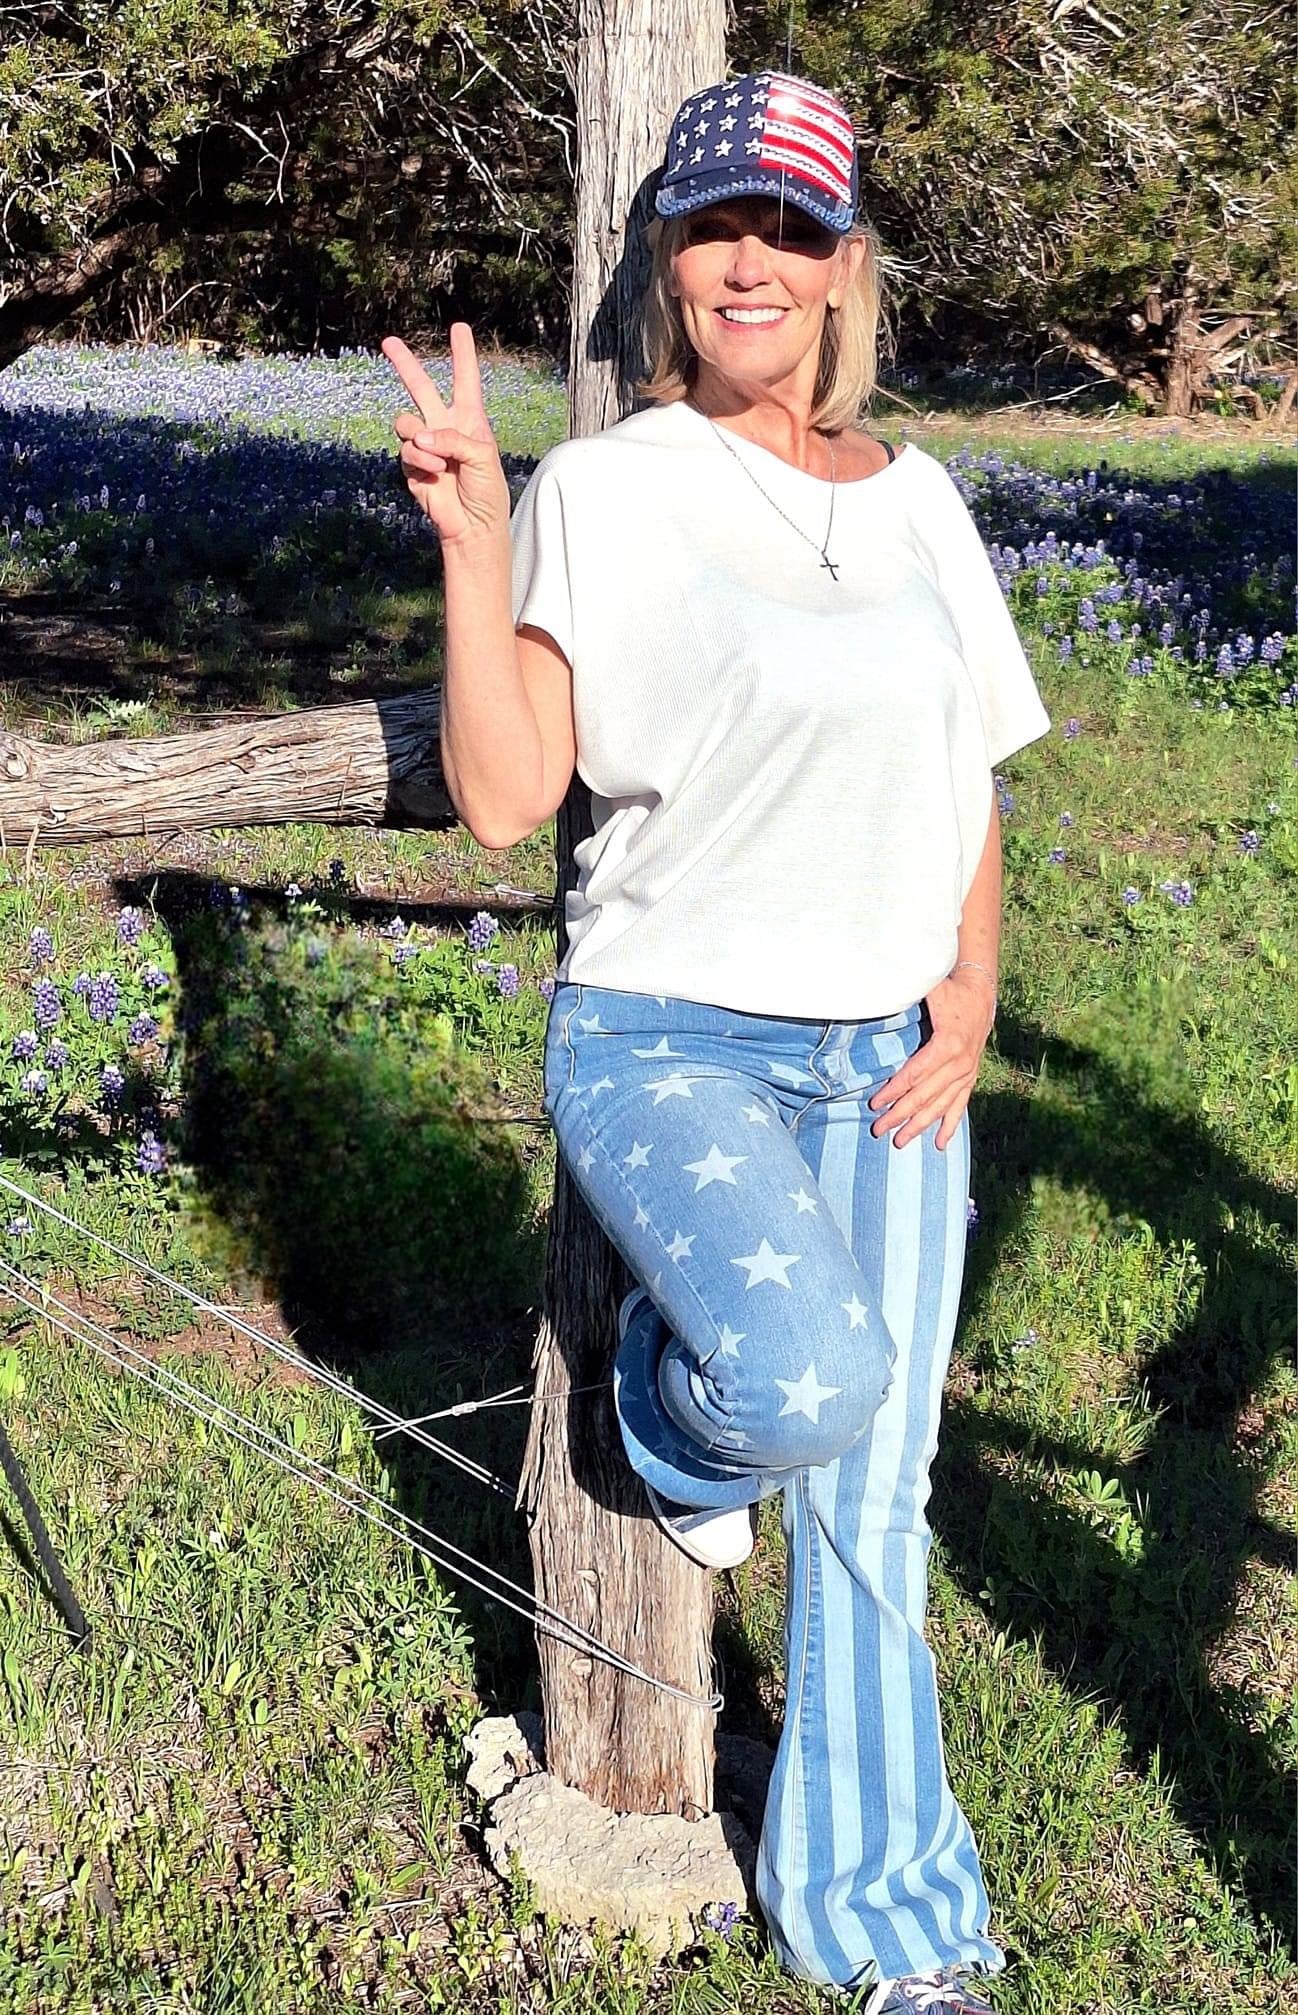 A woman wearing a white T-shirt, Freedom Rings - Judy Blue Flares by JB Boutique Simplified, and a cap with an American flag design stands outdoors by a wooden post in a field of wildflowers. She is smiling and making a peace sign with her hand.